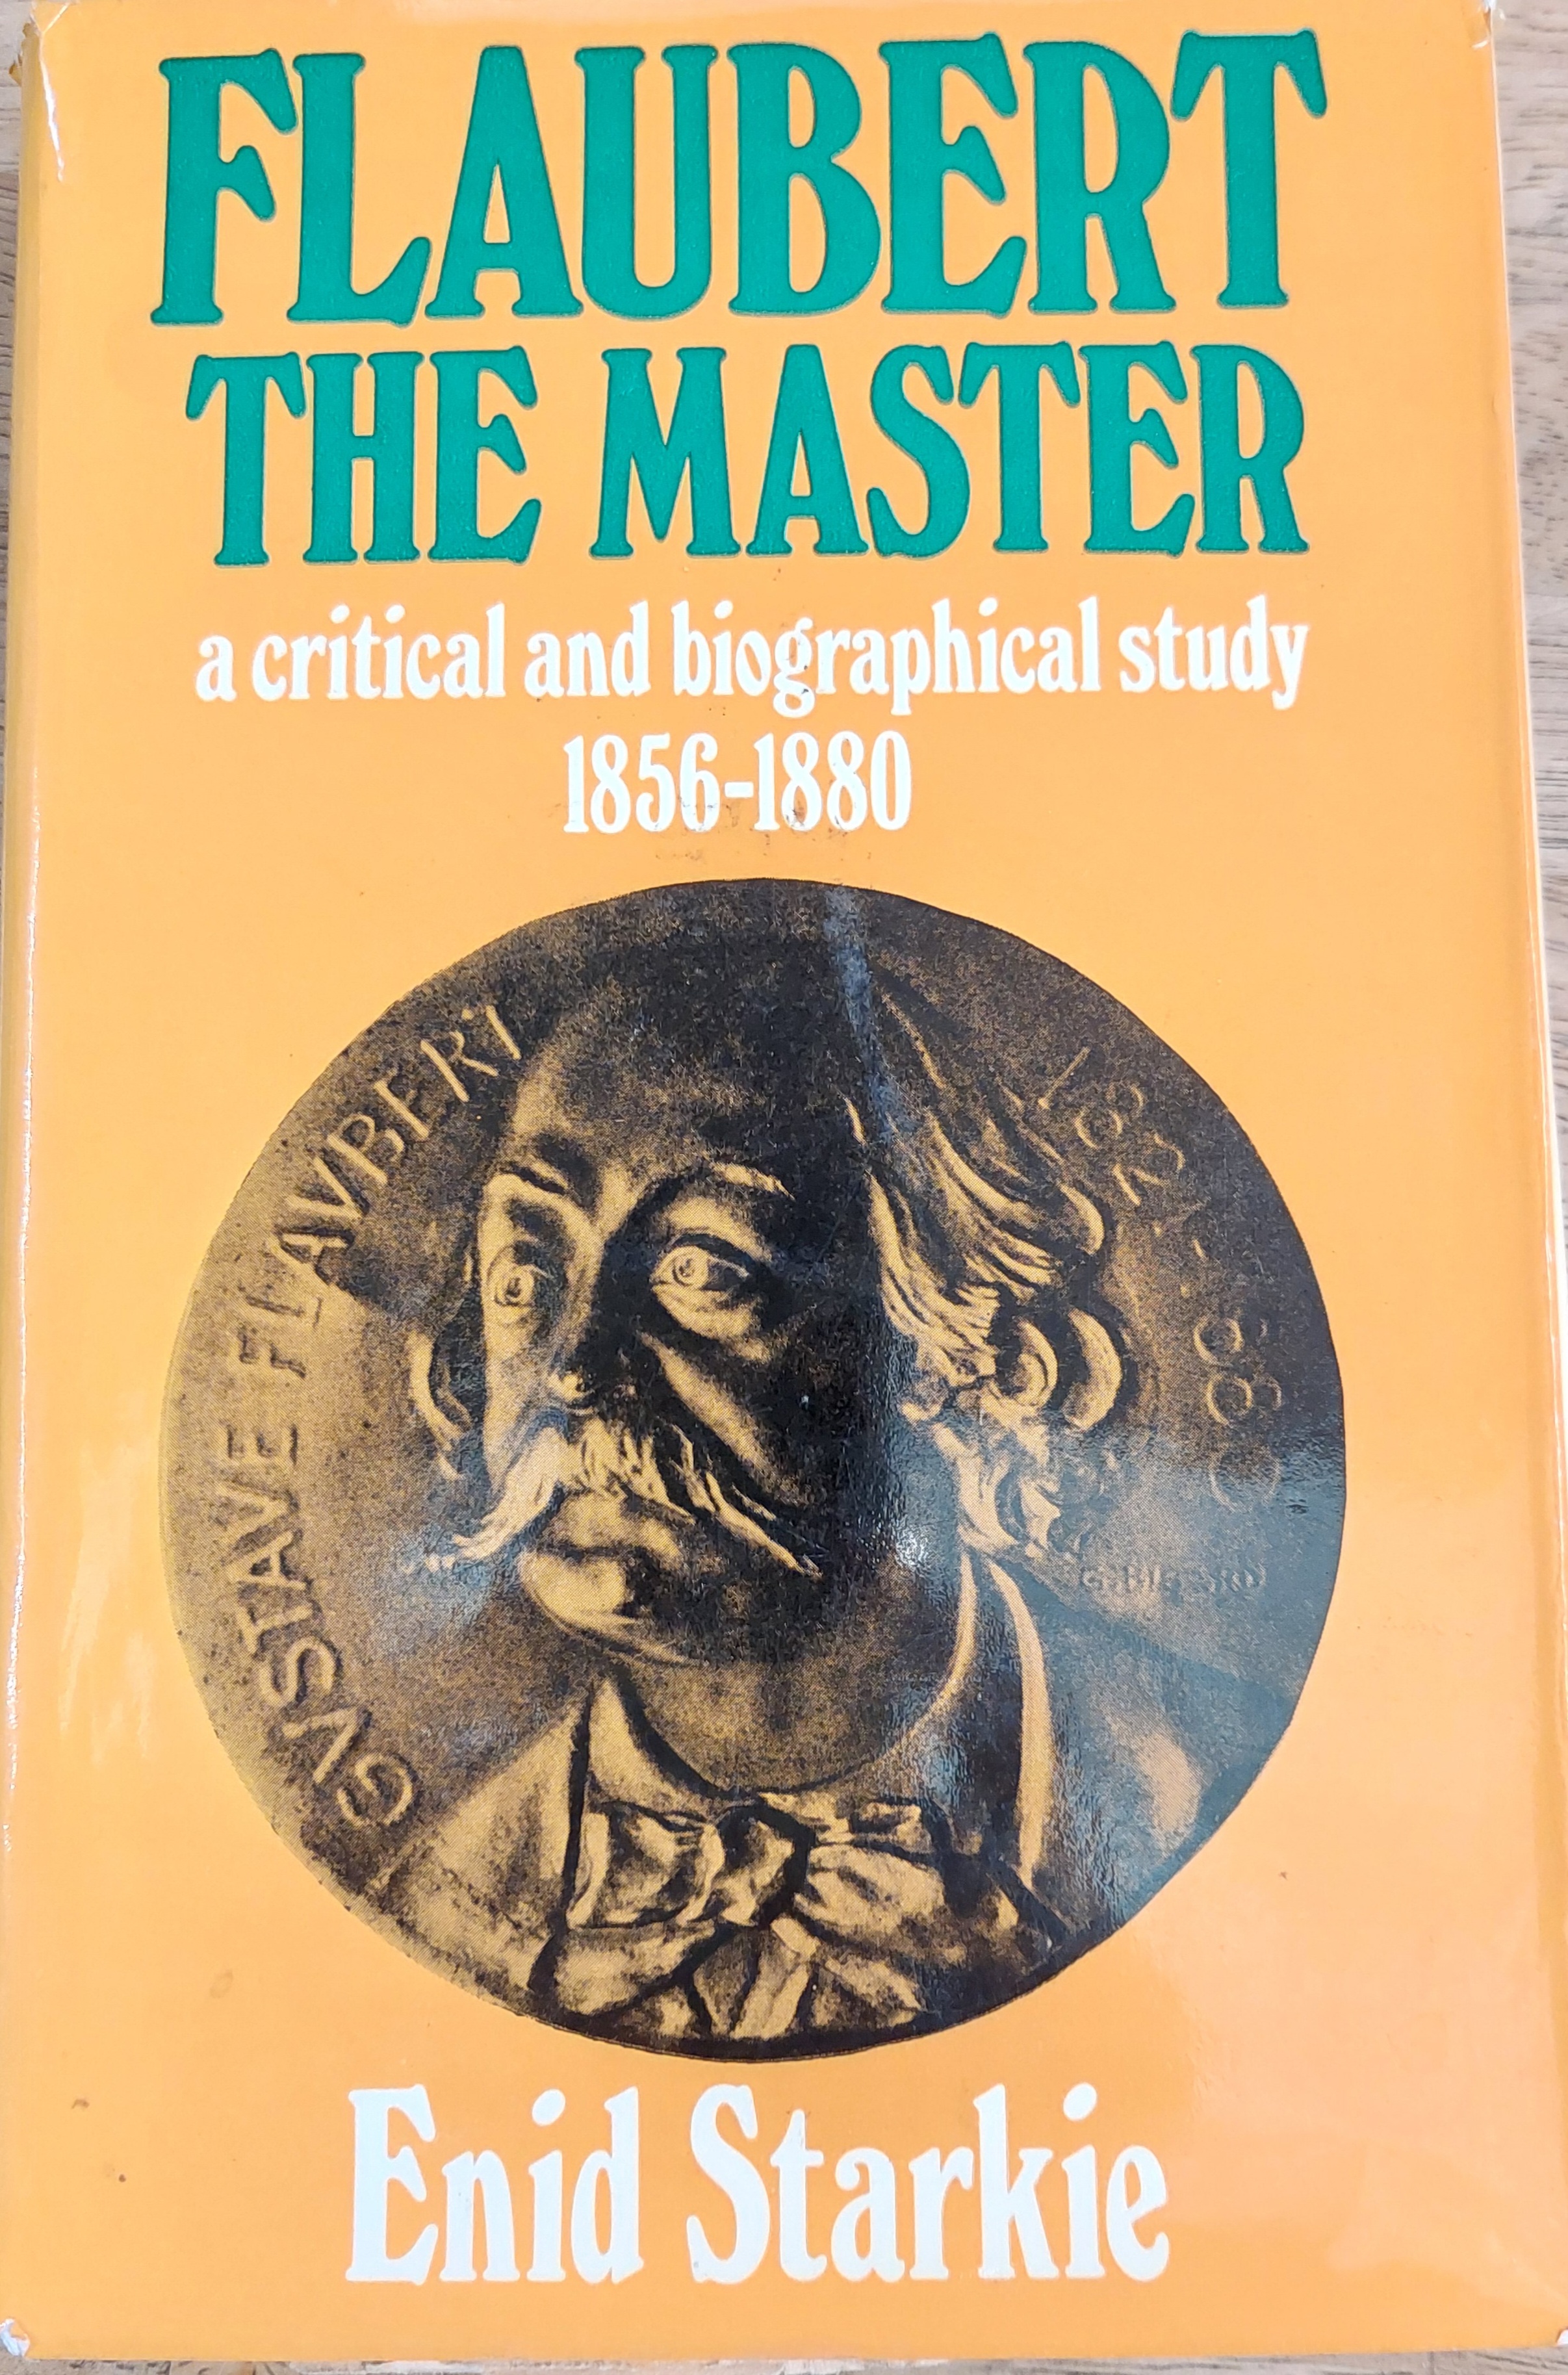 Flaubert the Master: A Critical and Biographical Study, 1856-80